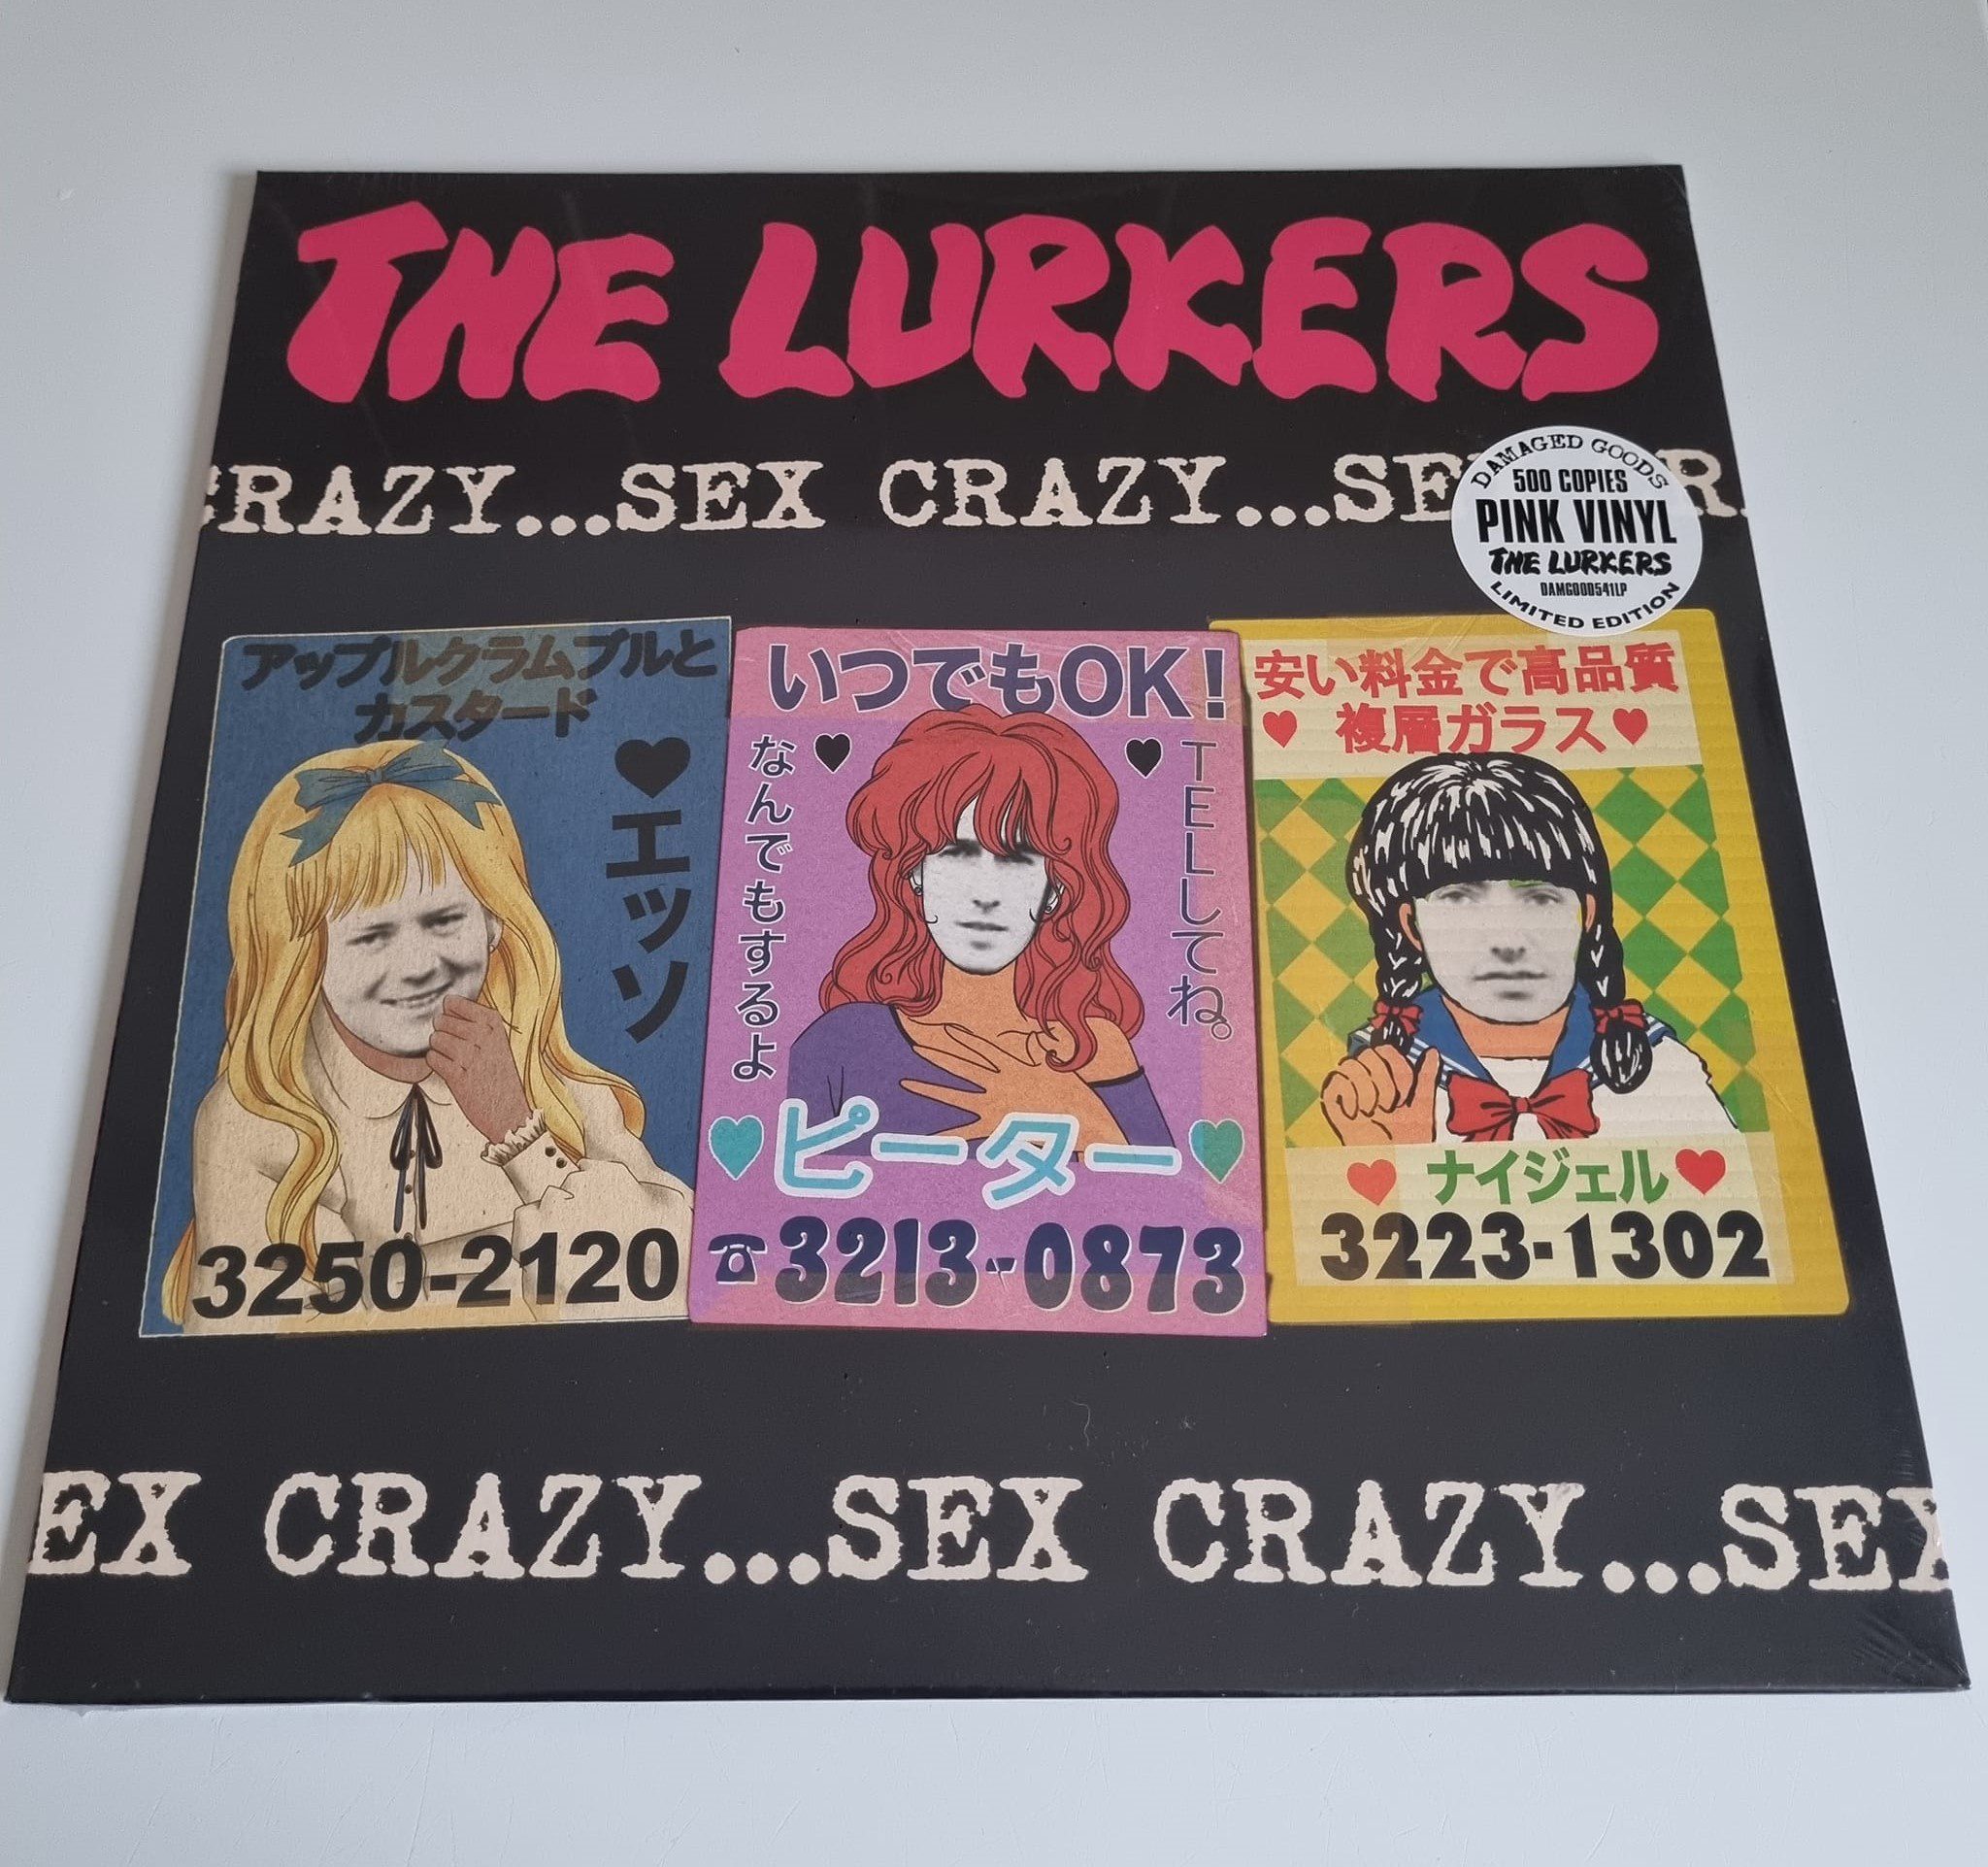 Buy this rare Lurkers record by clicking here